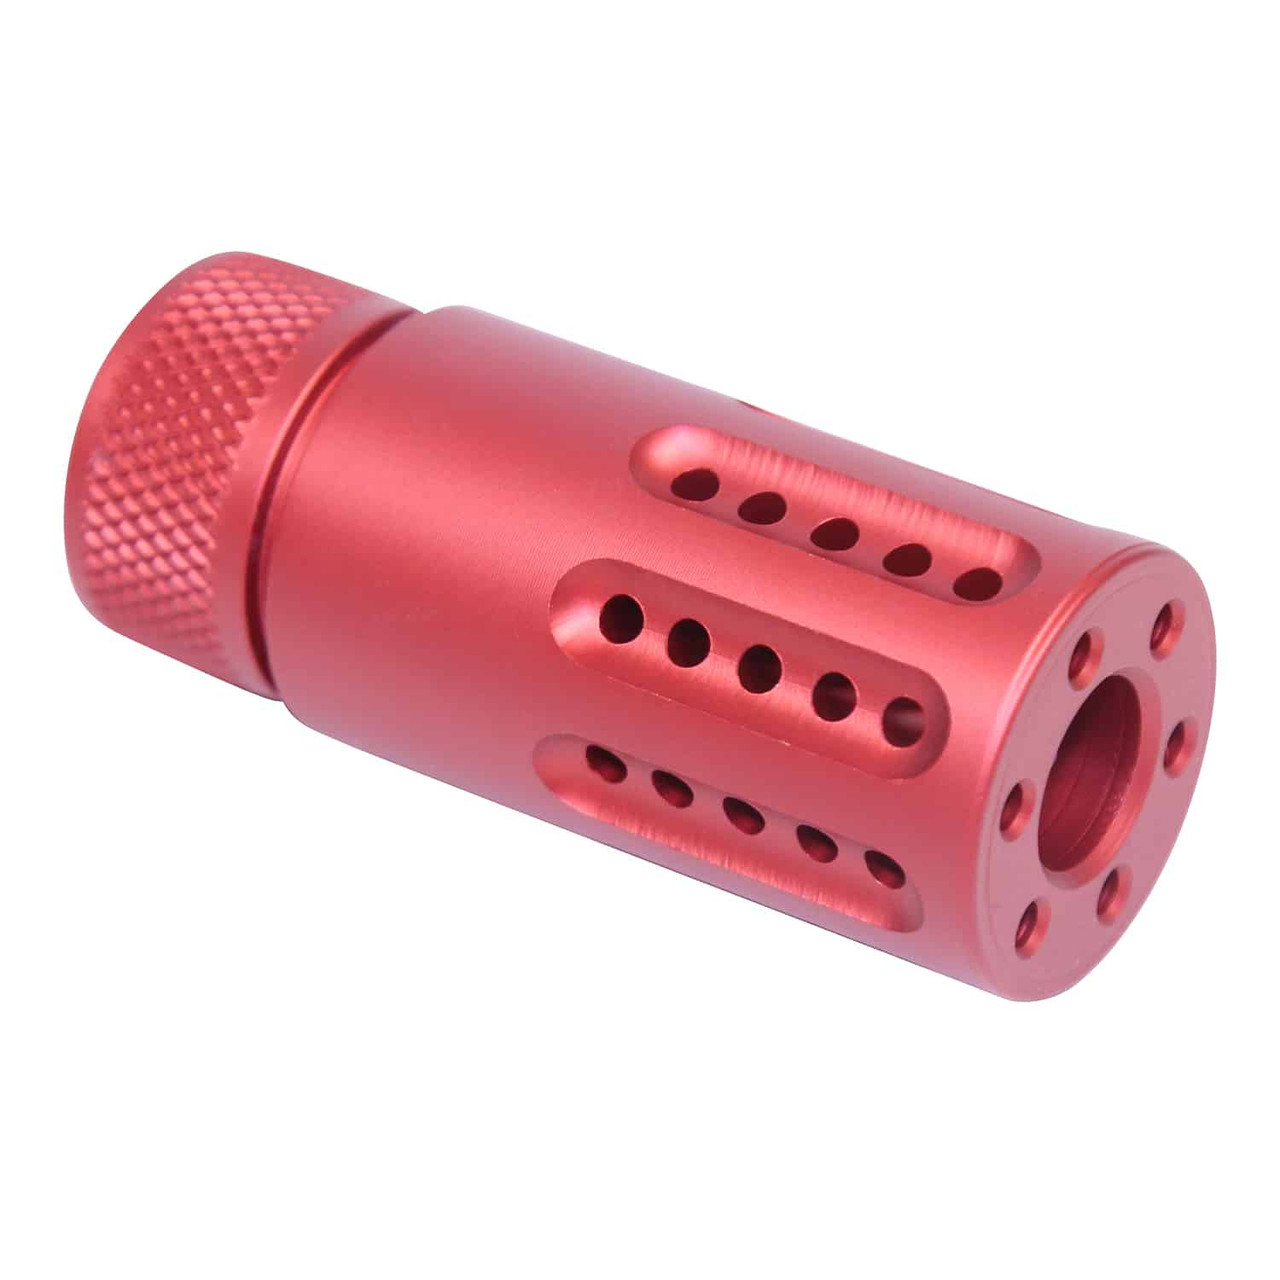 Guntec USA 1326-MB-P-S-RED Micro Slip Over Barrel Shroud With Multi Port Muzzle Brake (Anodized Red)